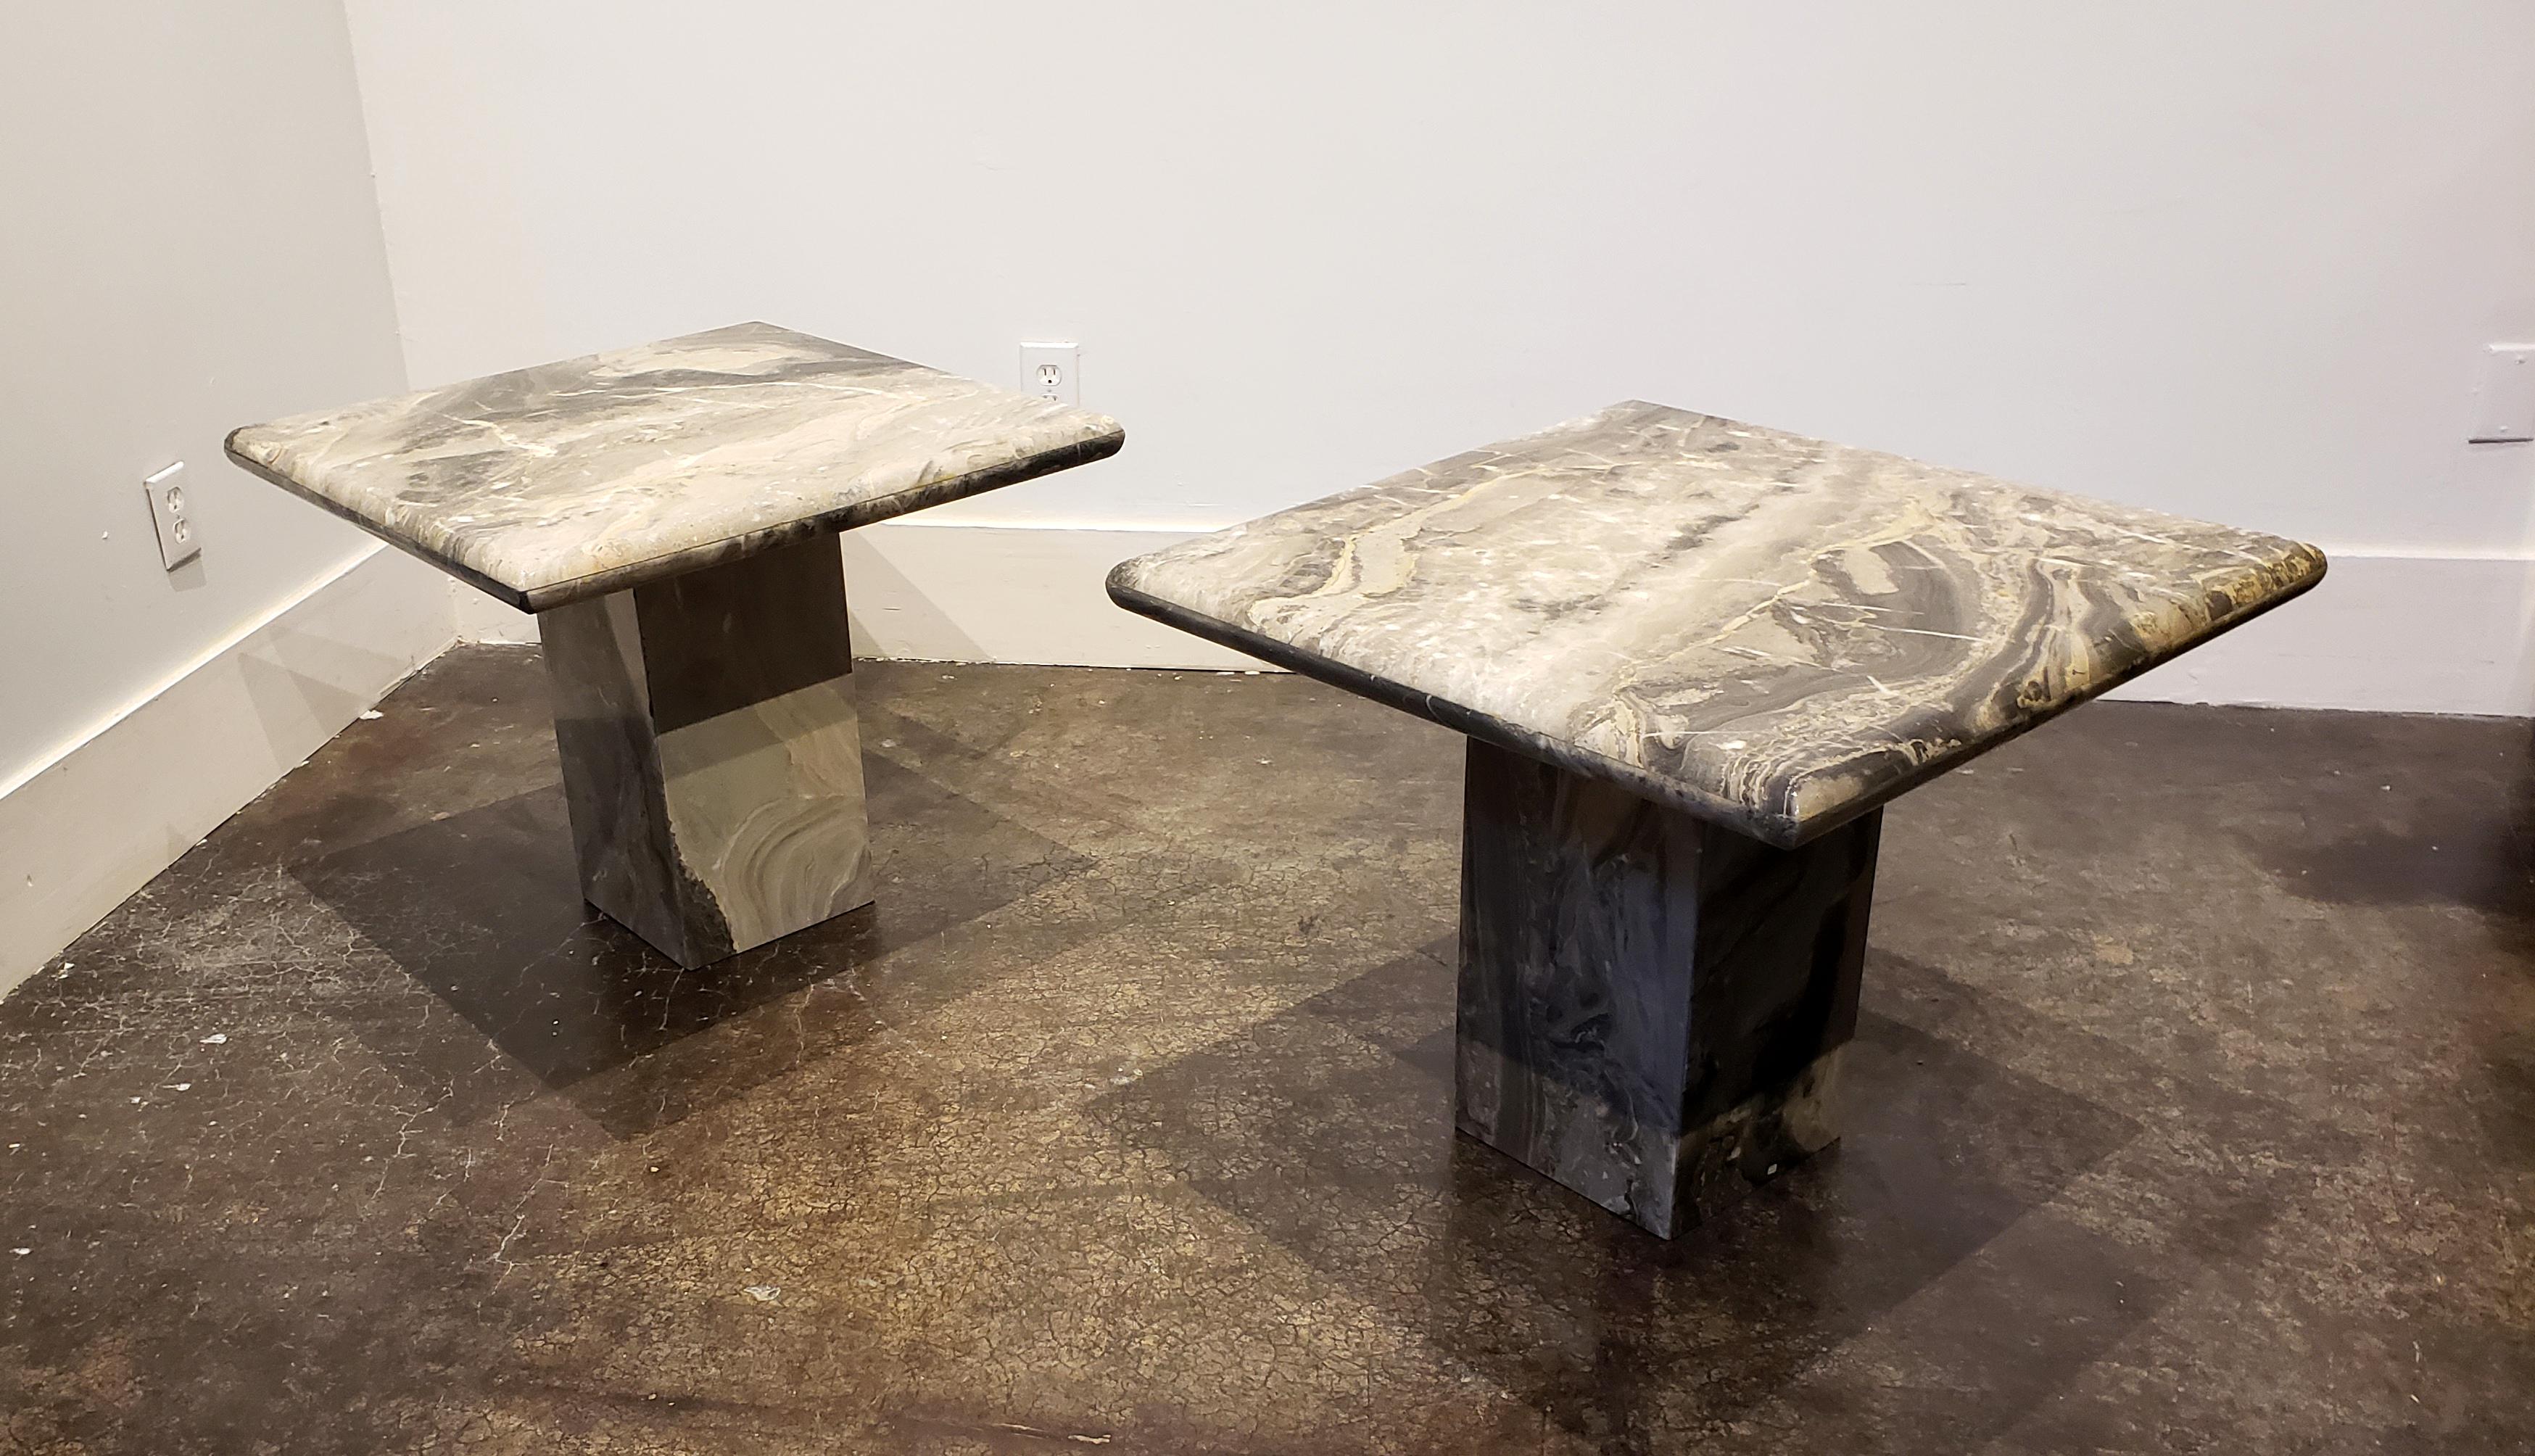 1980s Italian marble side tables. Rounded-edge square tops on tall square bases. Warm Italian arabesque Orobico marble in sweeping patterns of black, grey, tan and white. Very good vintage condition with age appropriate wear. Matching coffee table